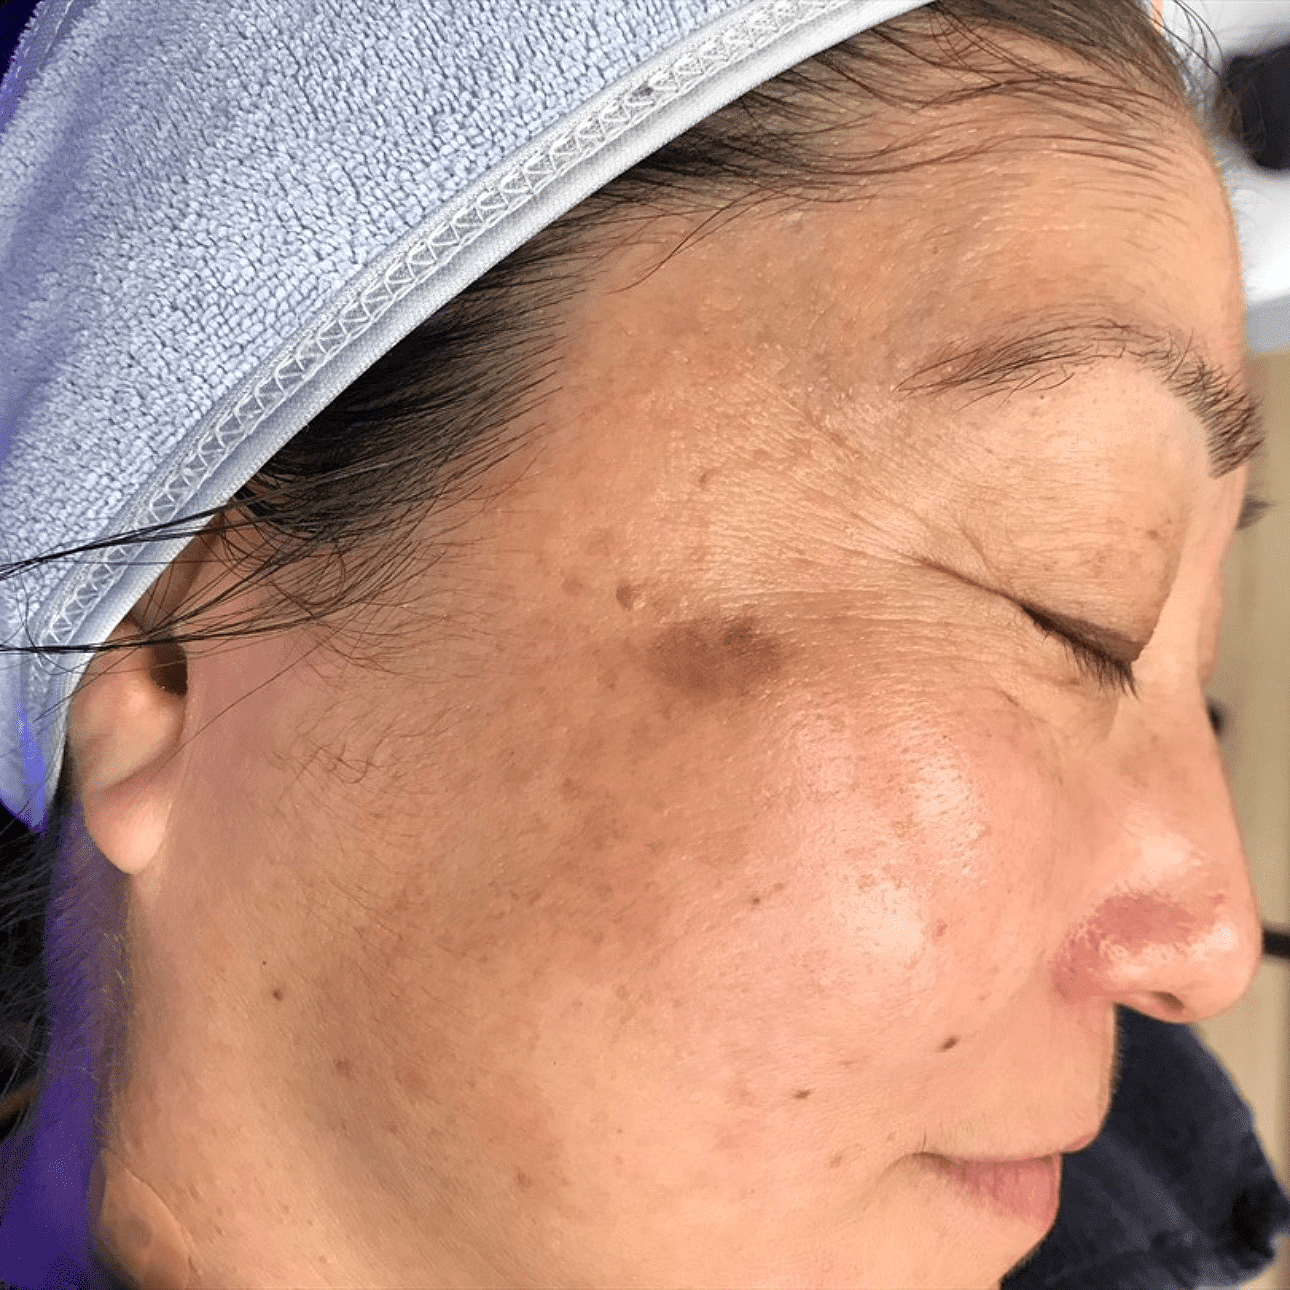 age spots removal treatment before